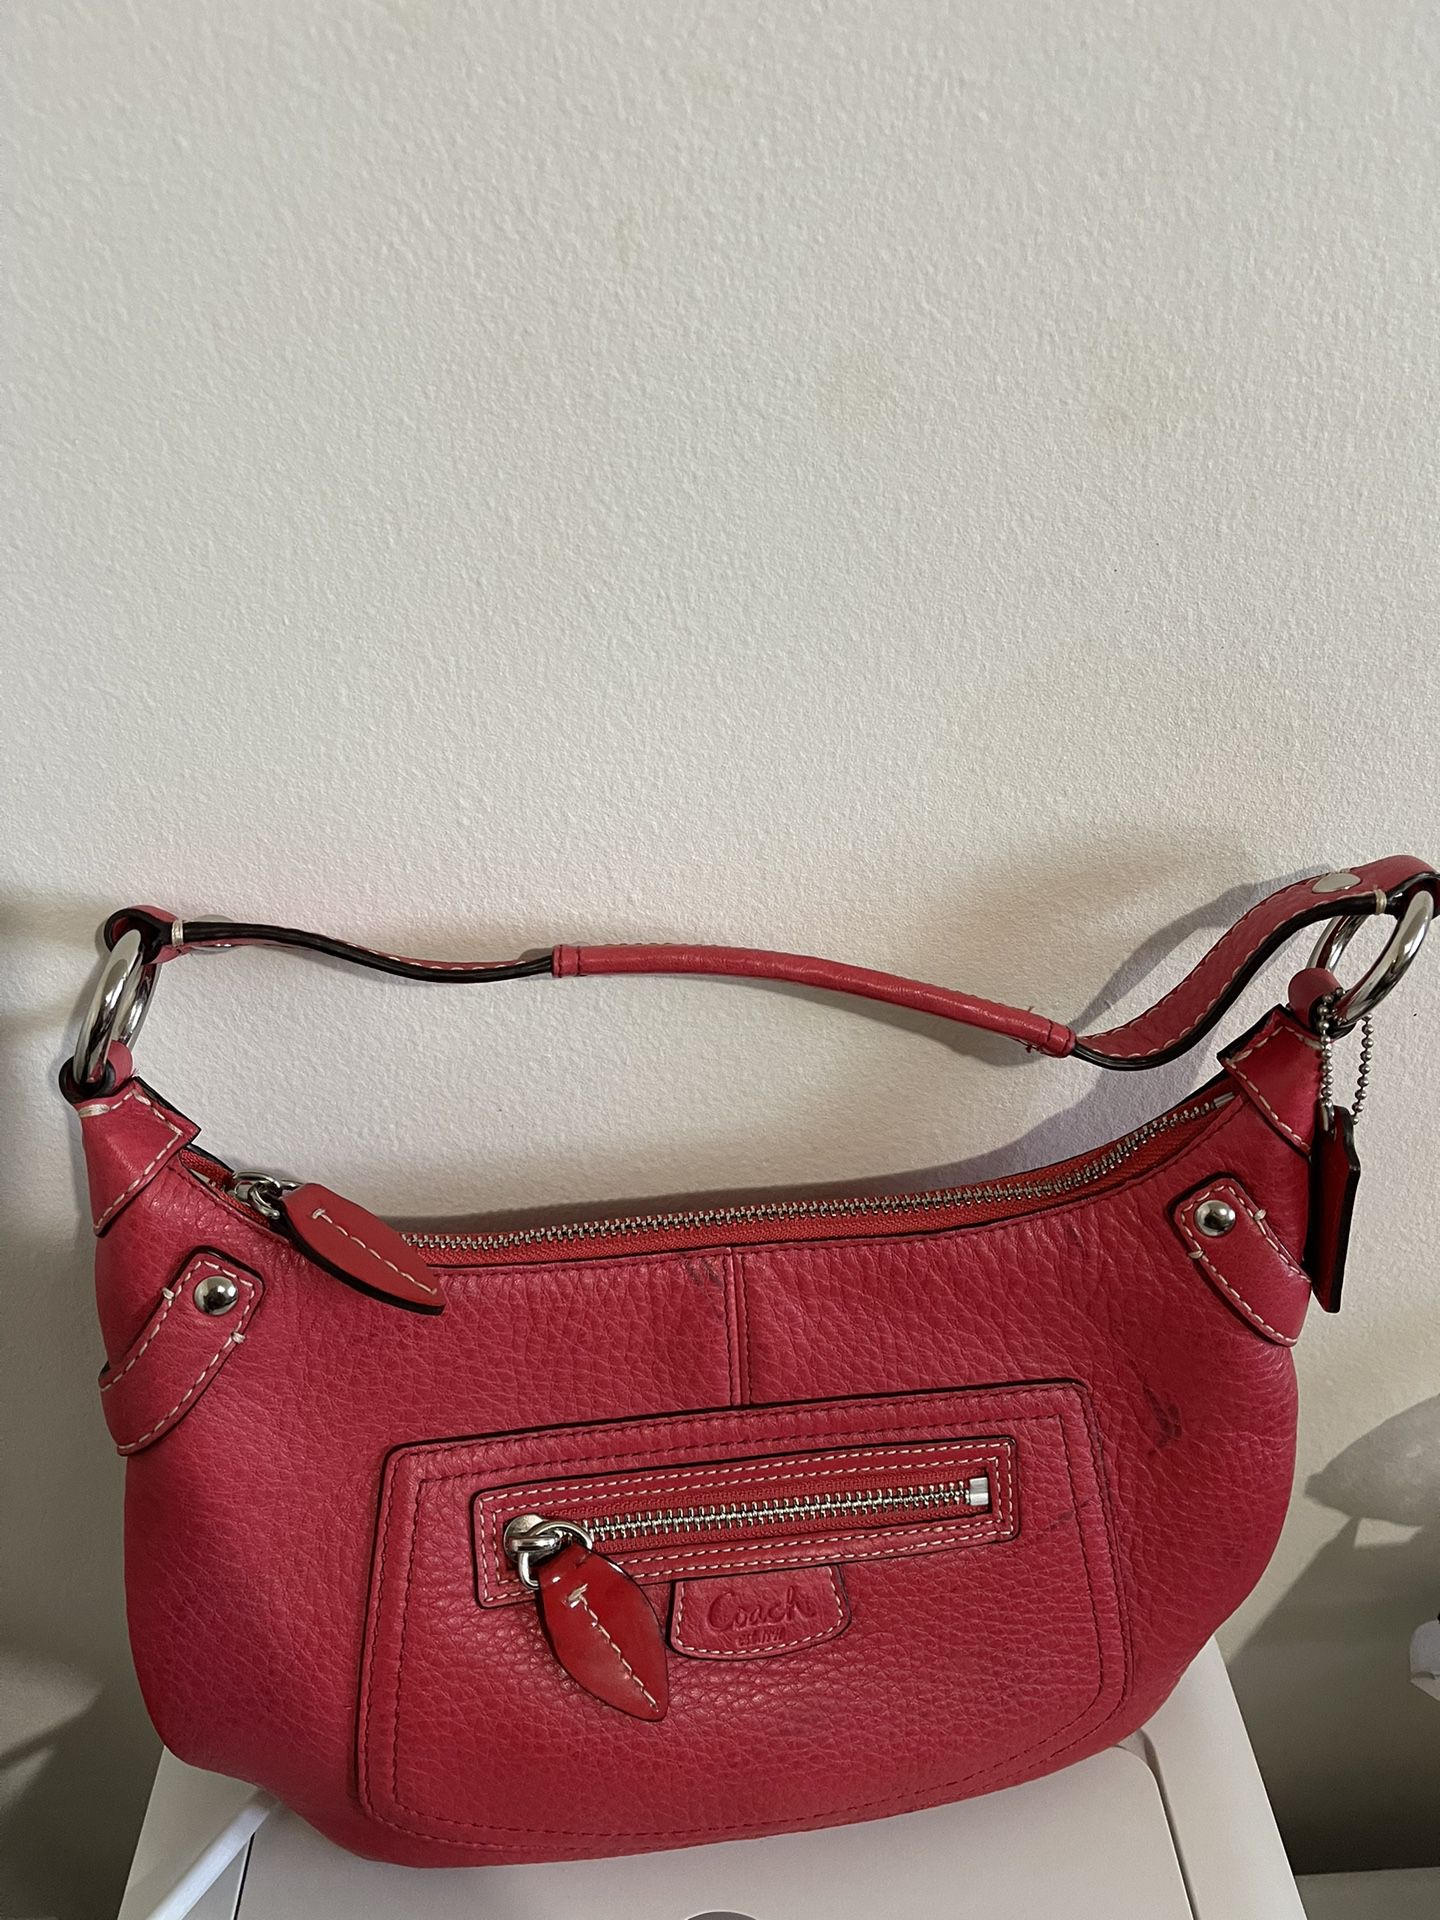 Coach Red Pebbled Leather Penelope Hobo Hand Bag 